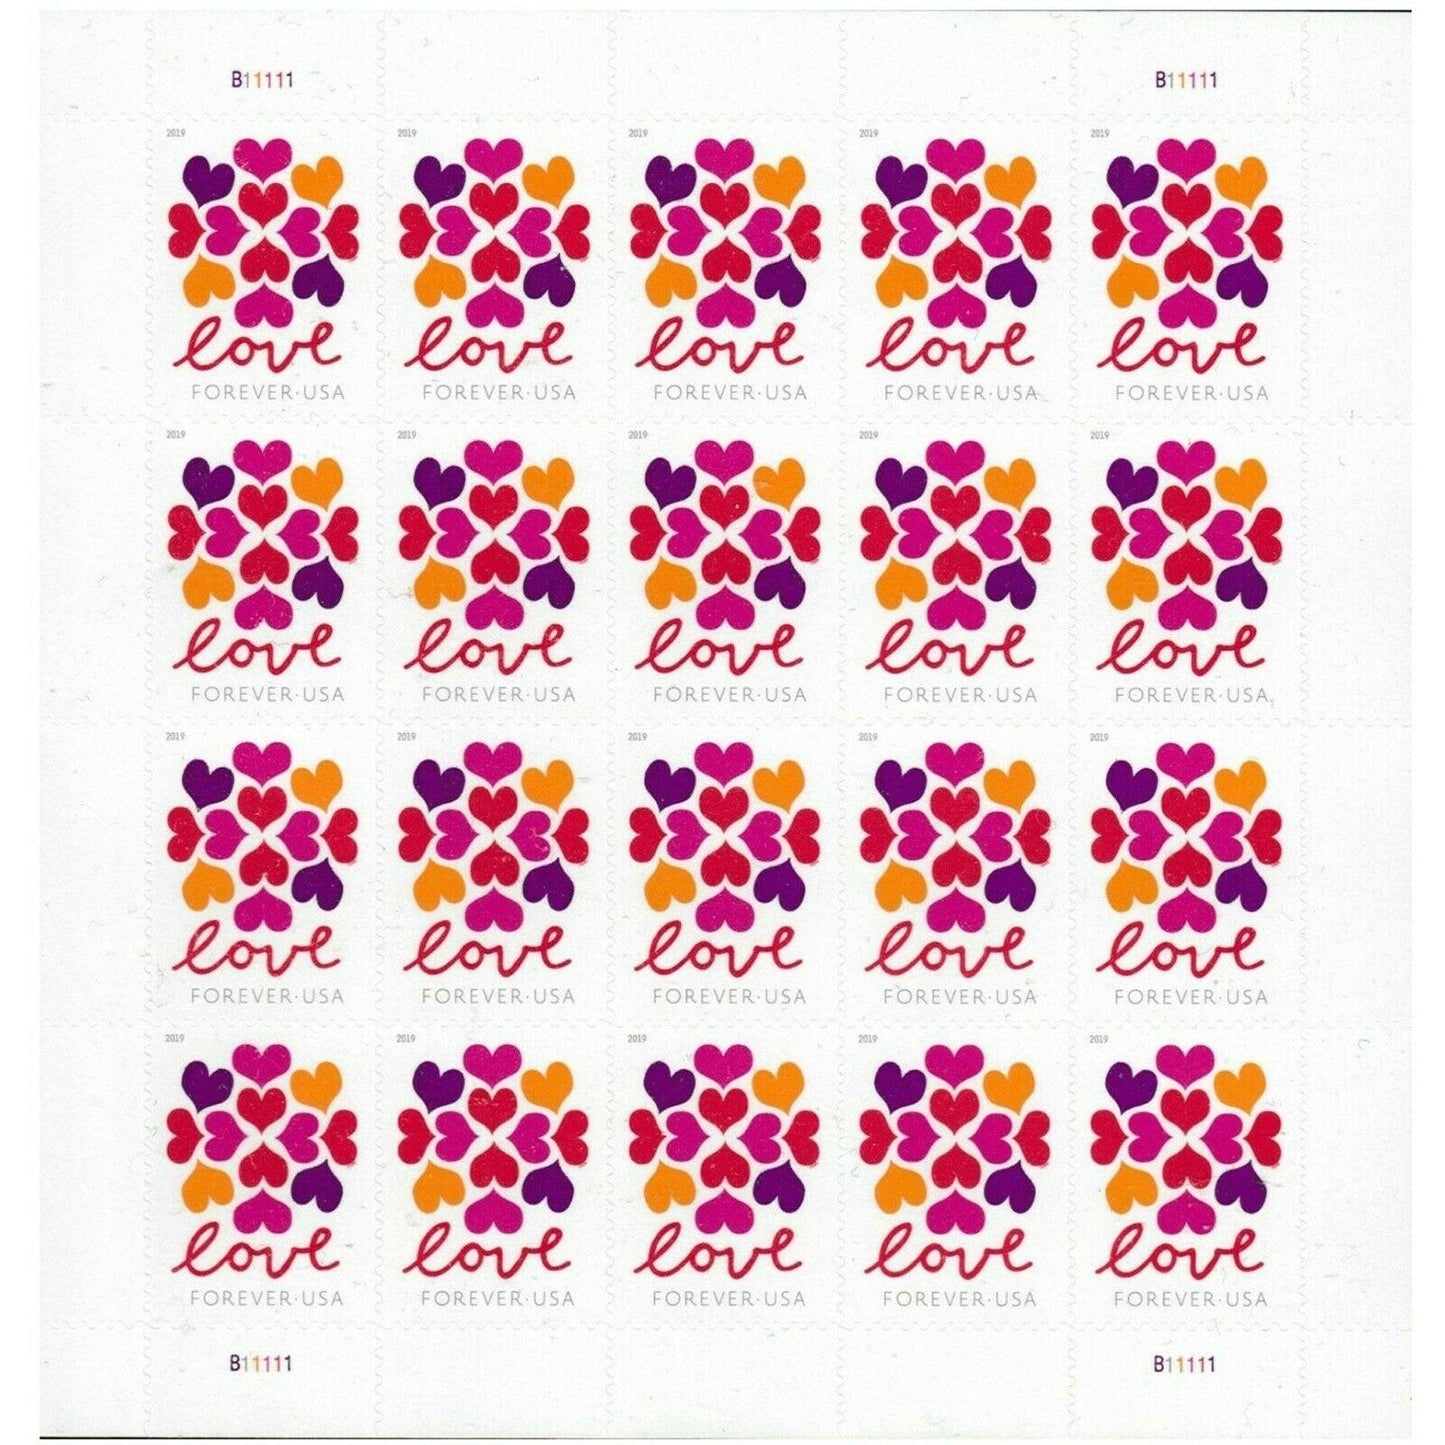 Love Hearts Blossom Forever Postage Stamps